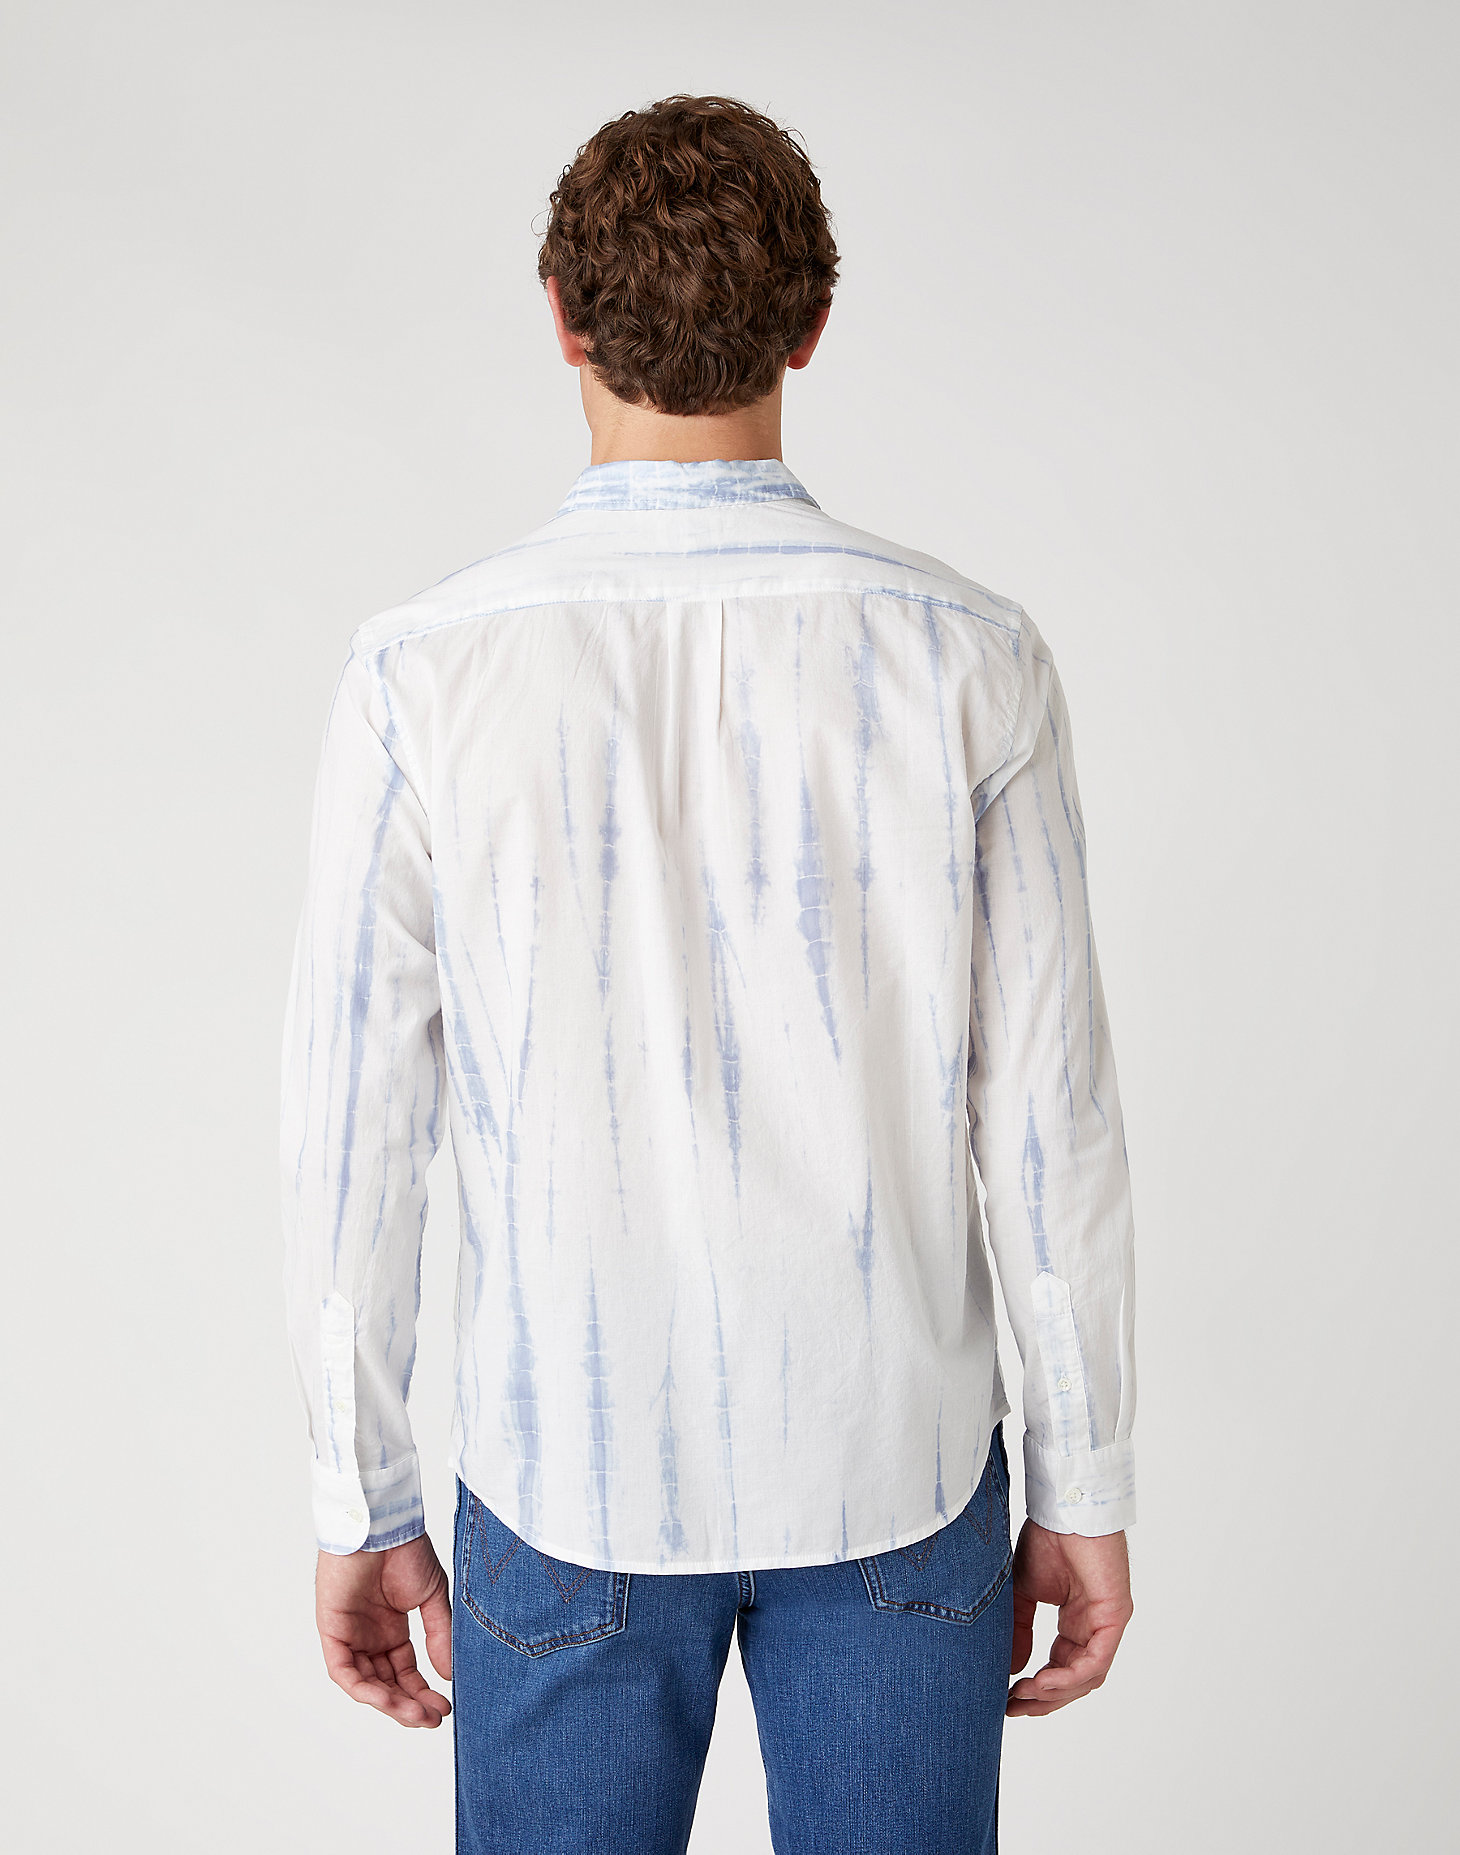 Long Sleeve One Pocket Shirt in White alternative view 2